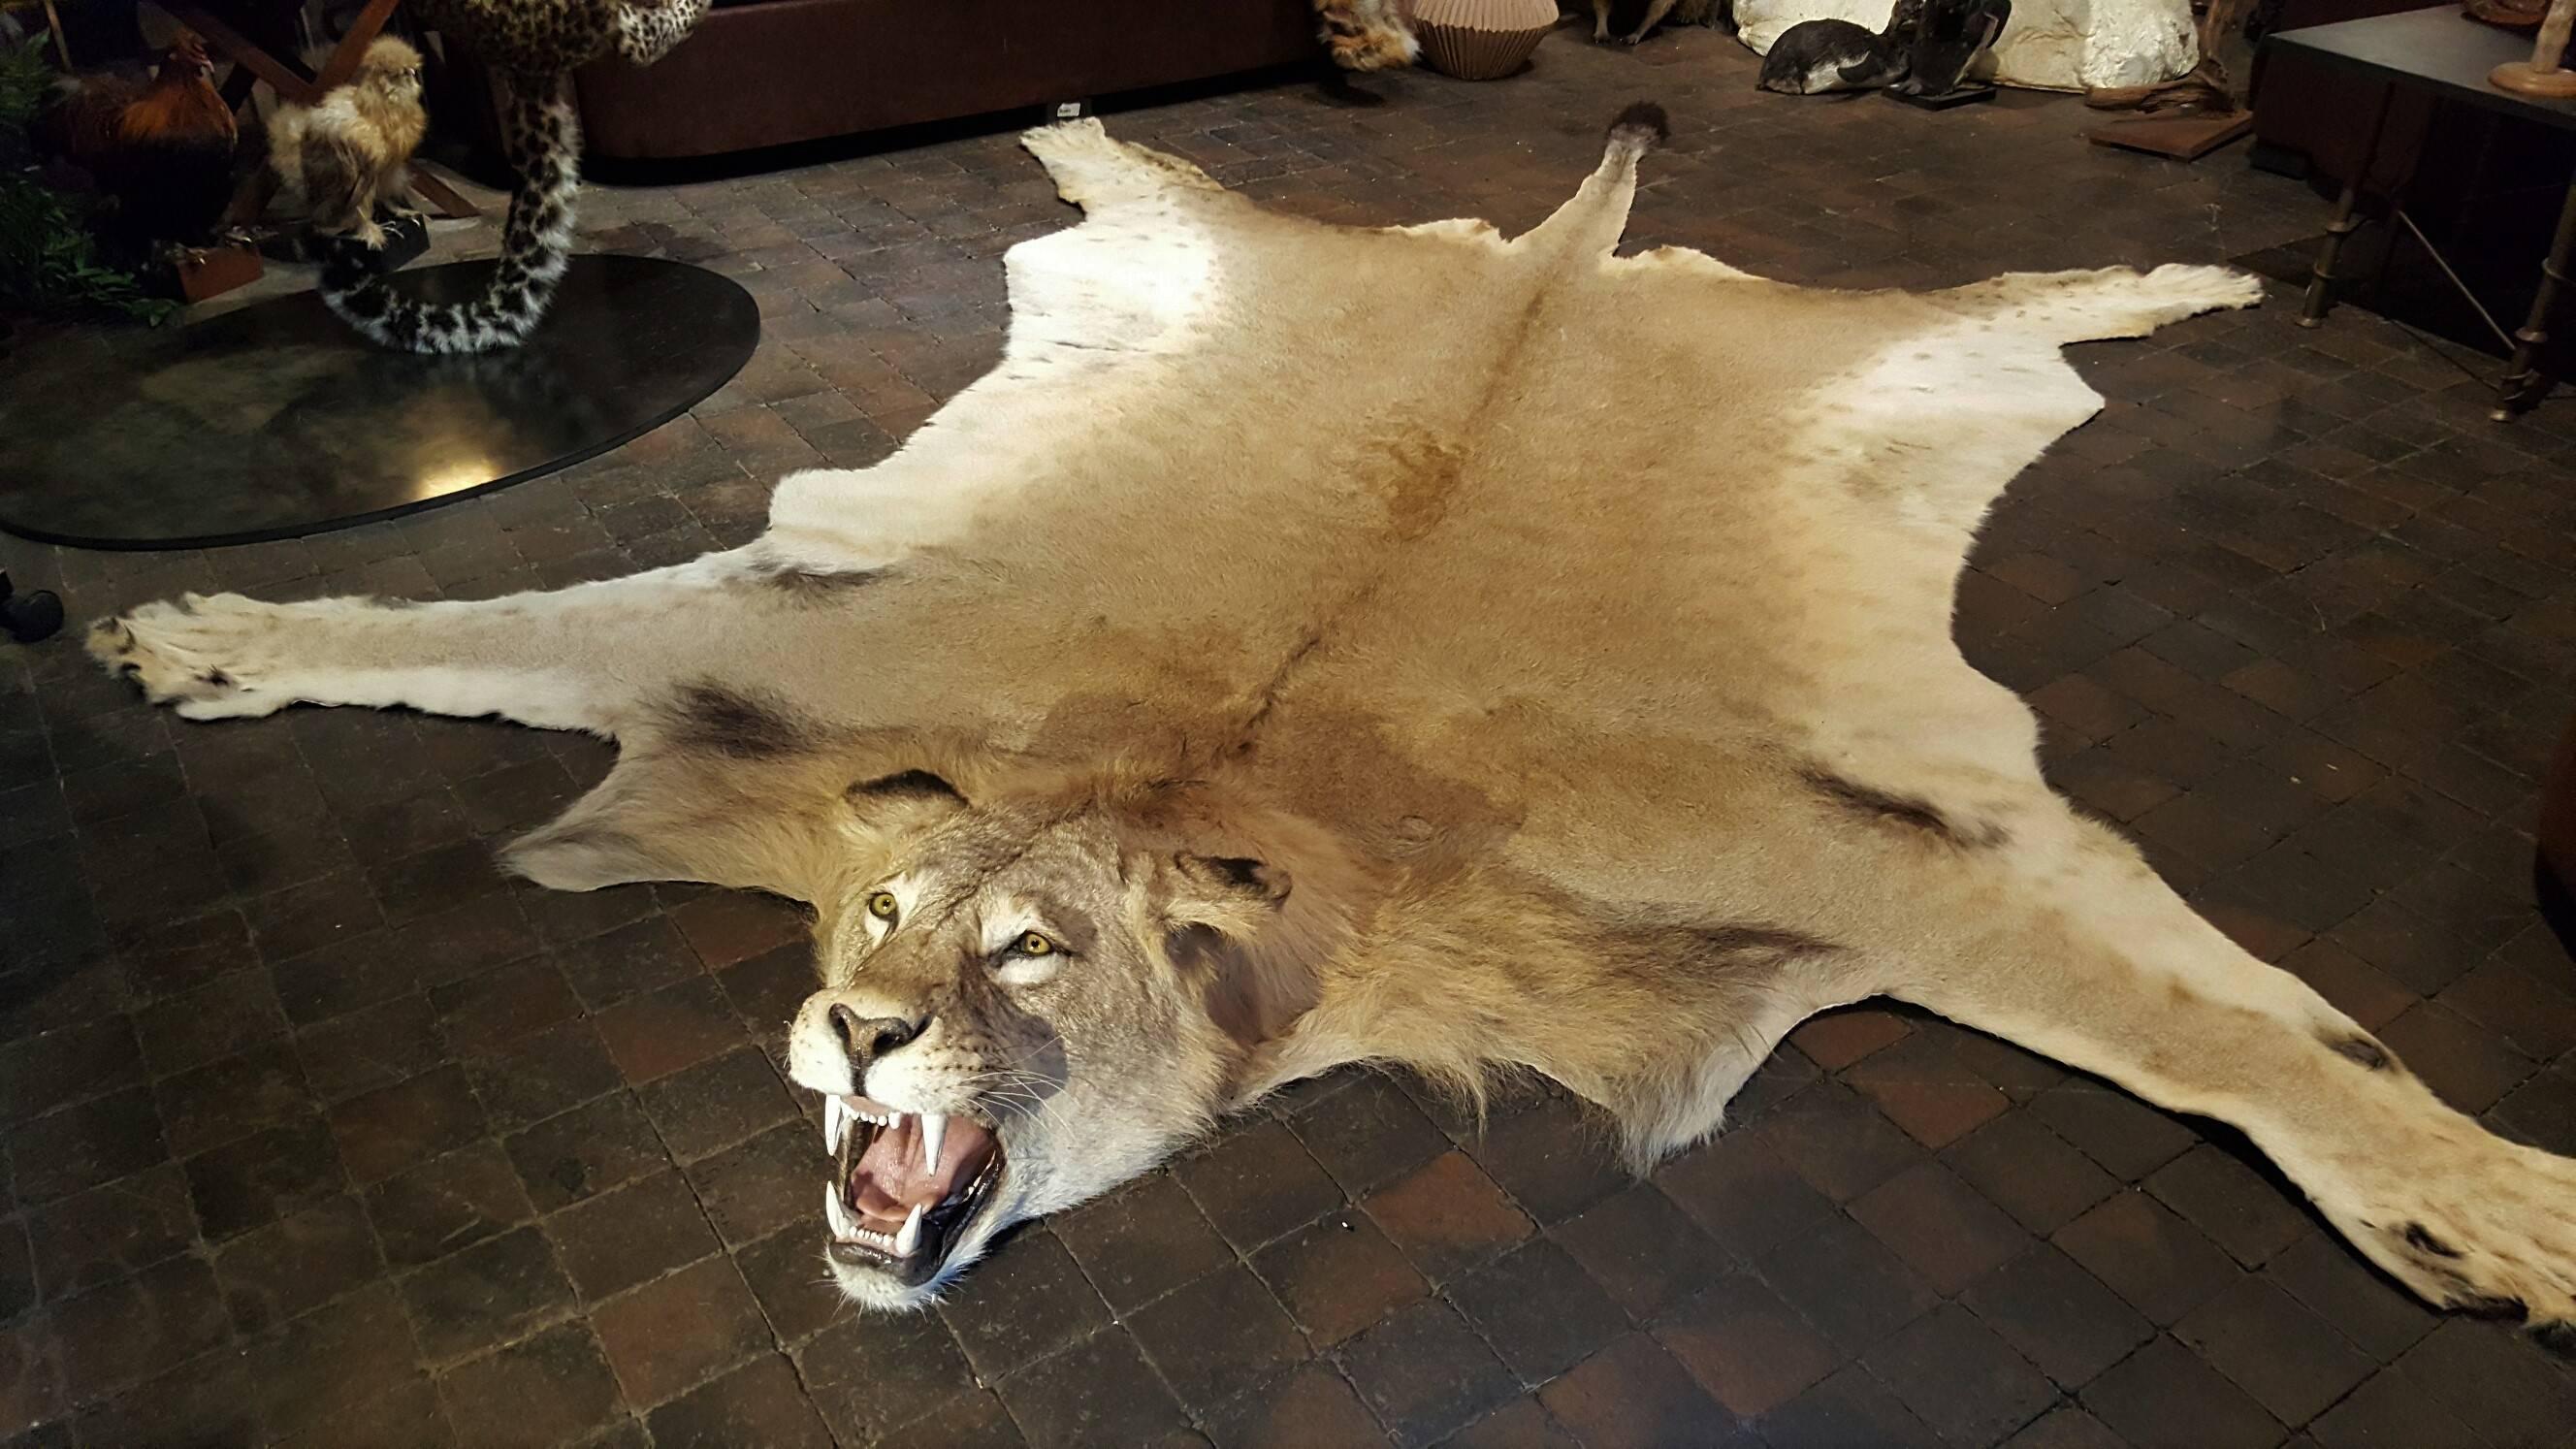 Young male lion skin rug with full head mount, glass eyes, on a black felt backing.
CITES Appendix II/B
Museum quality, in excellent condition.
This animal is bred and died in captivity and sold in compliance with CITES regulations.
This